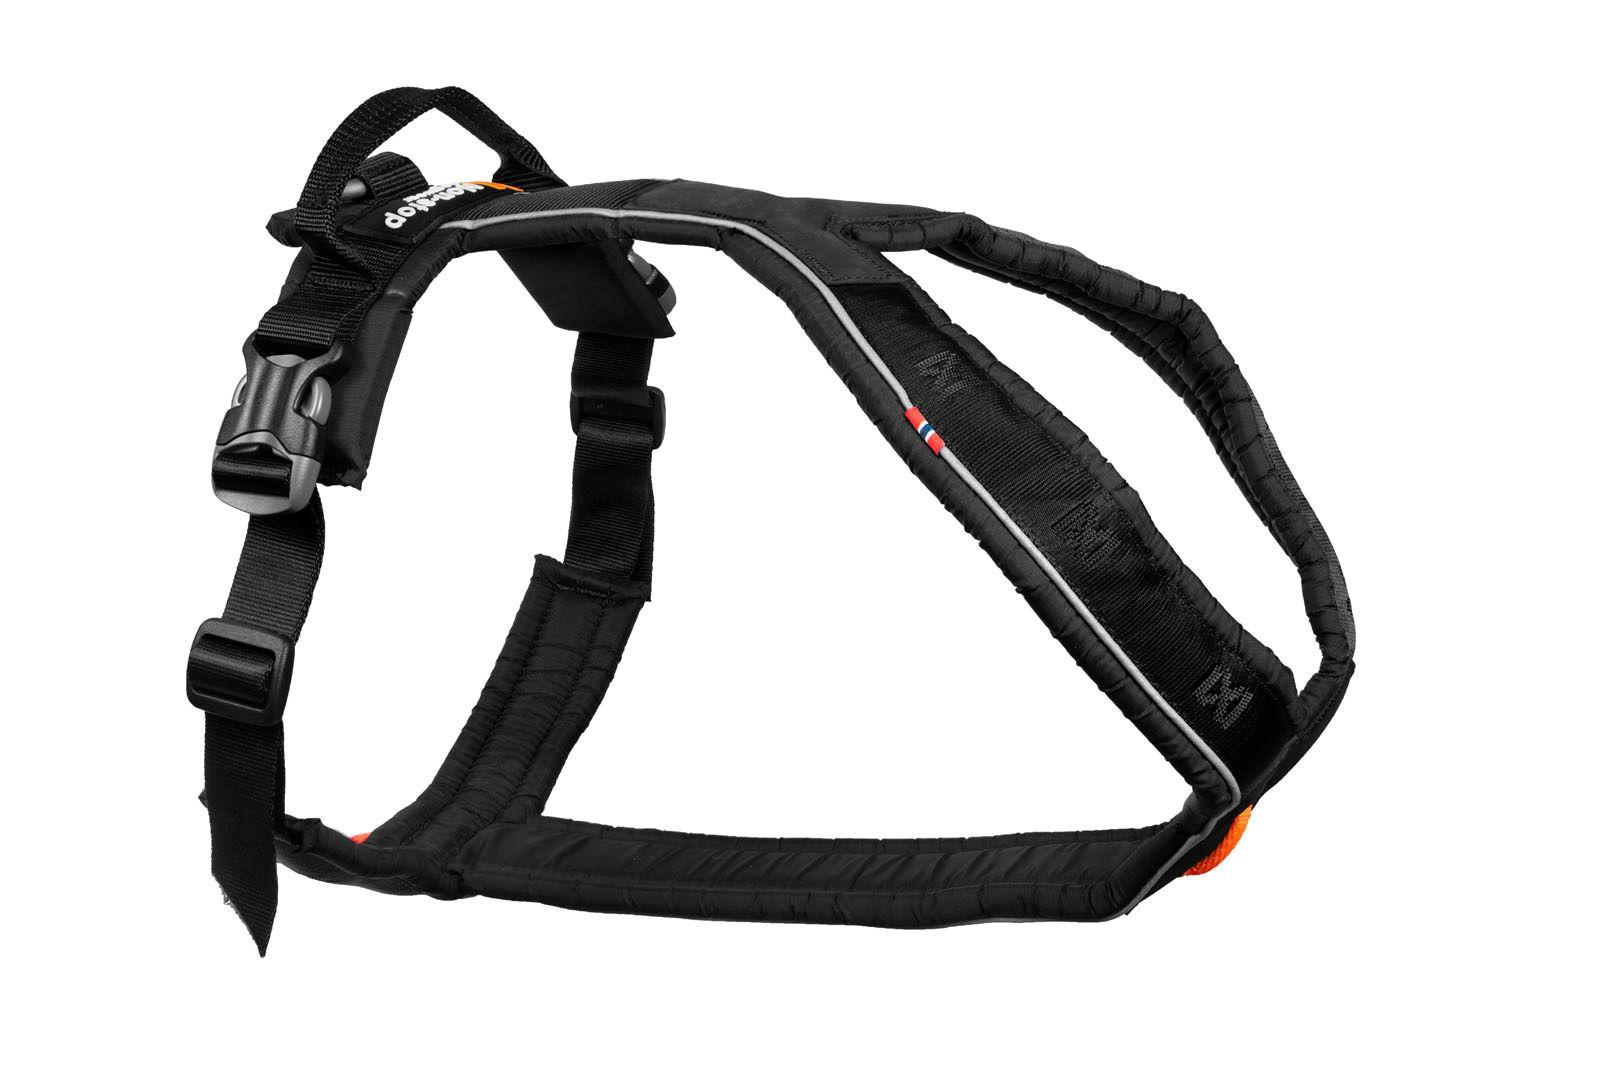 Non-stop Grip Line Harness a versatile harness for walking and canicross